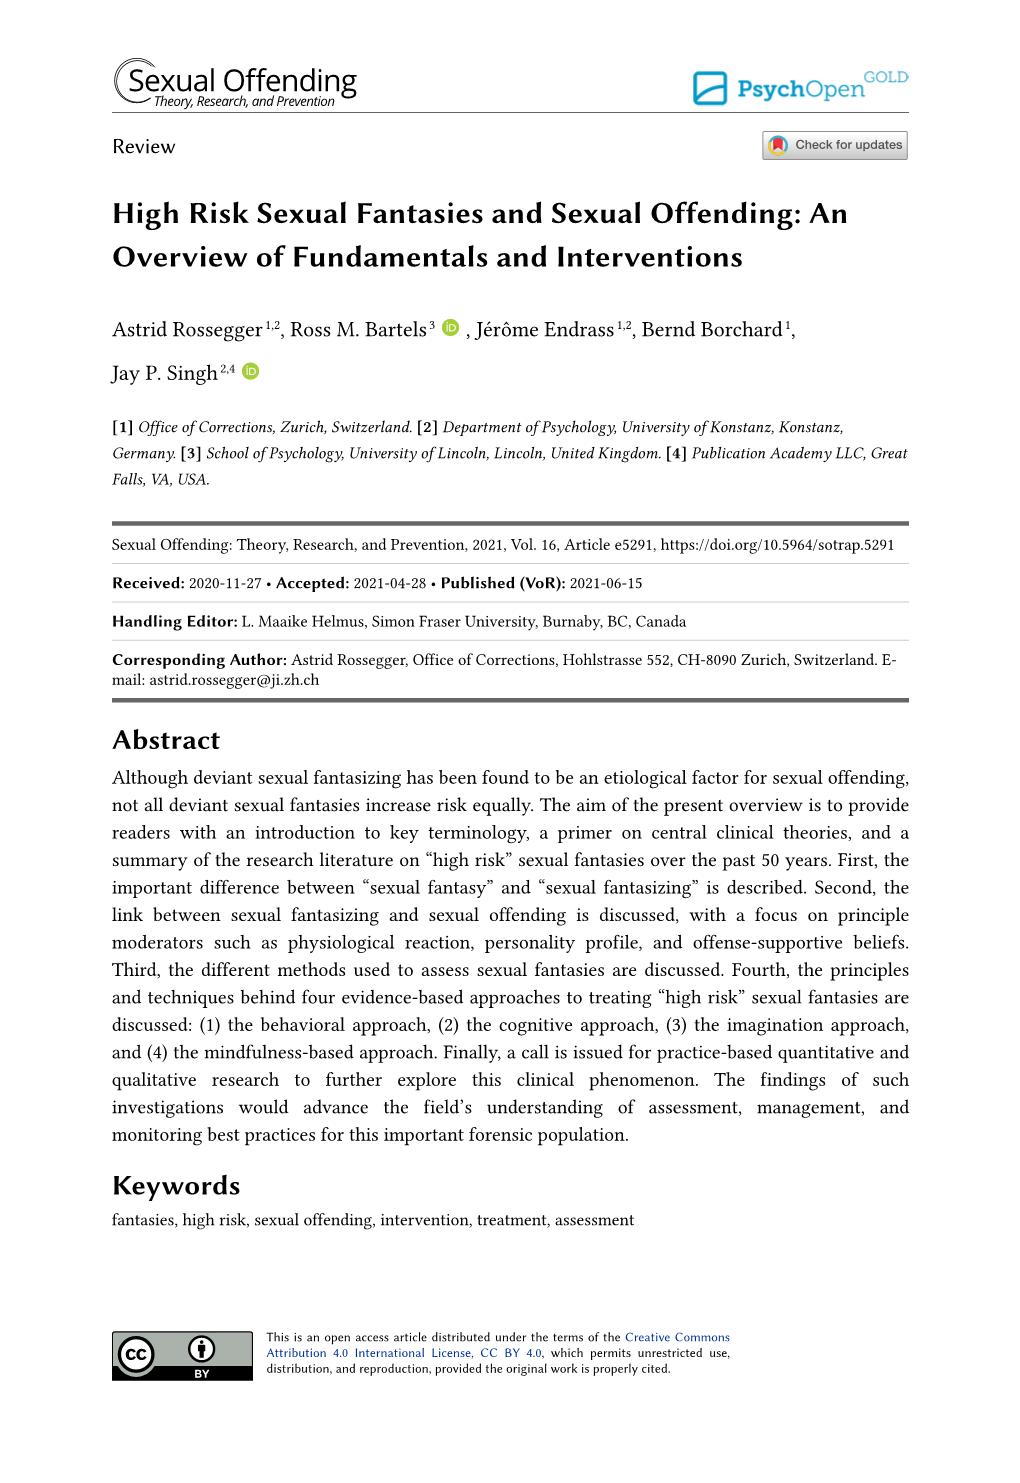 High Risk Sexual Fantasies and Sexual Offending: an Overview of Fundamentals and Interventions